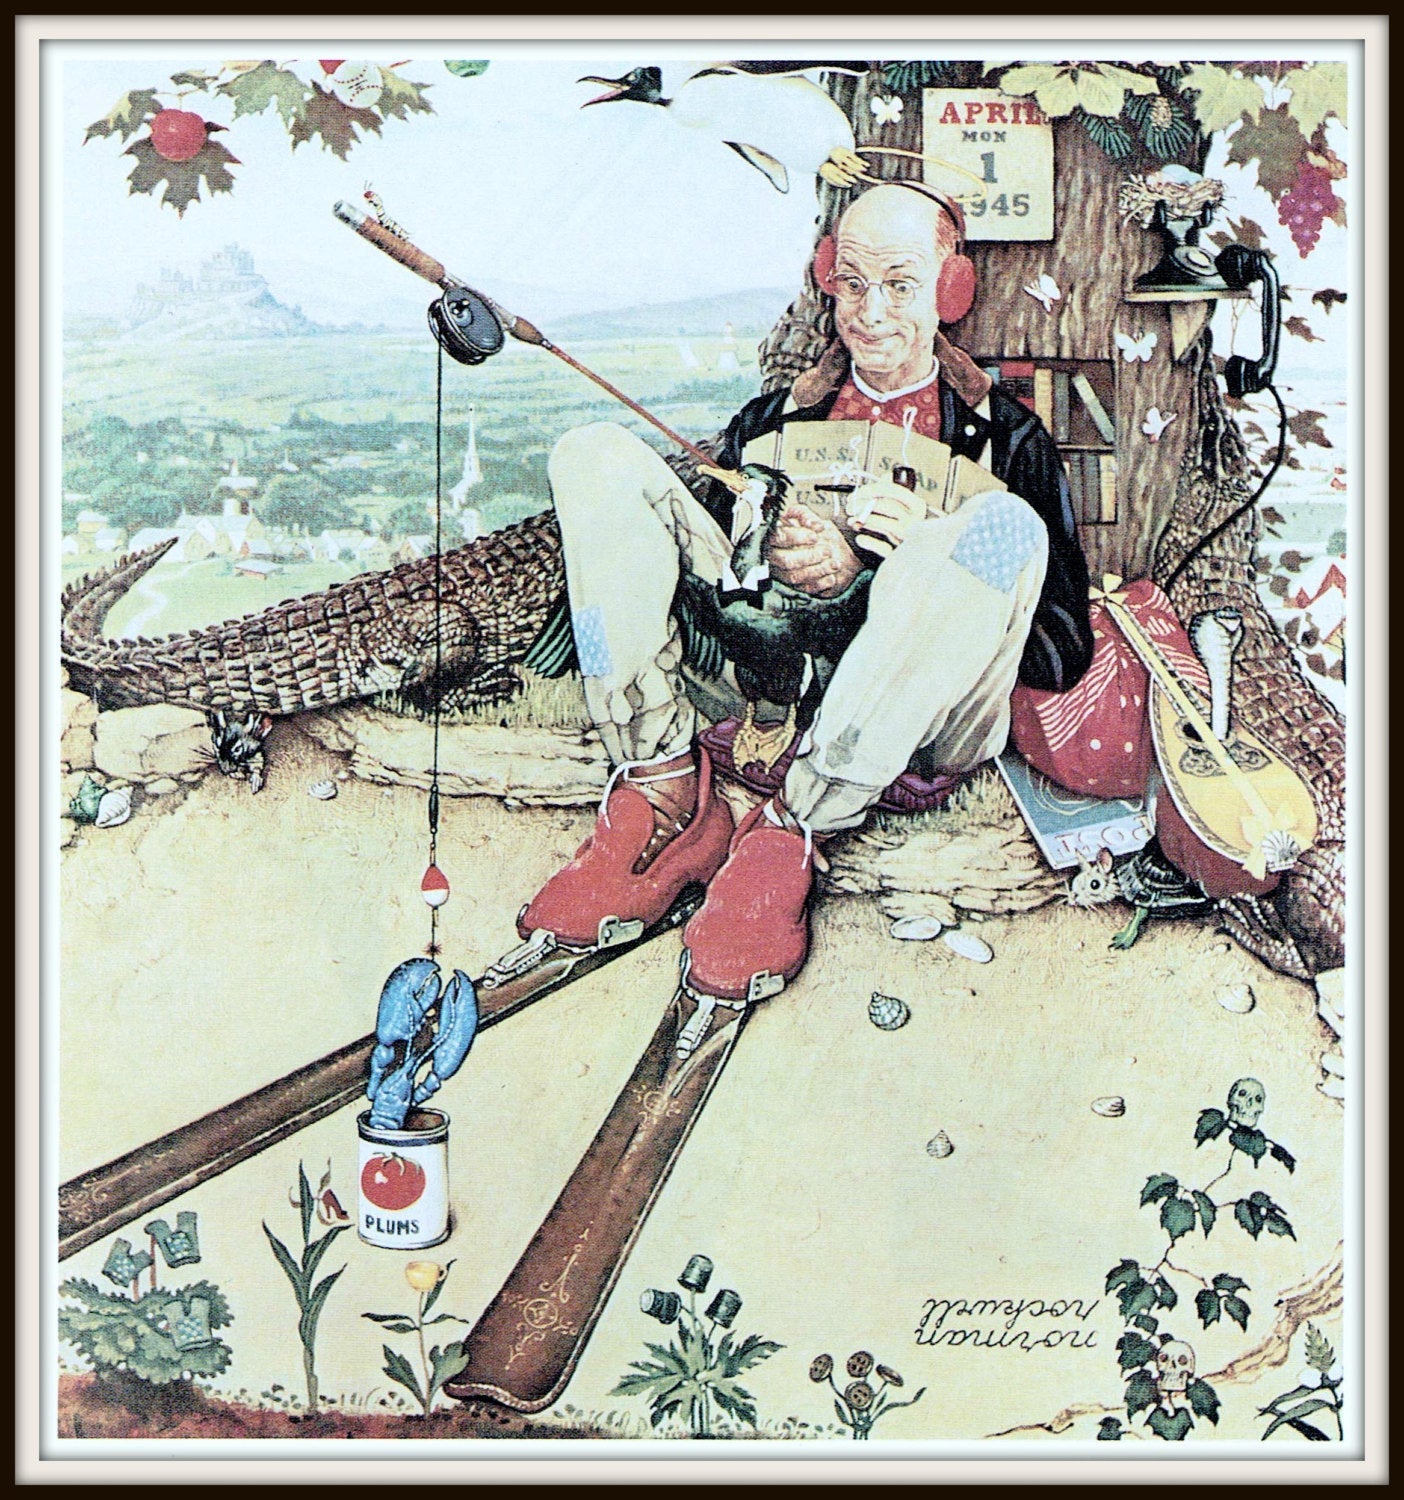 Art Print, Norman Rockwell, April Fool Fishing 1945, Gift for